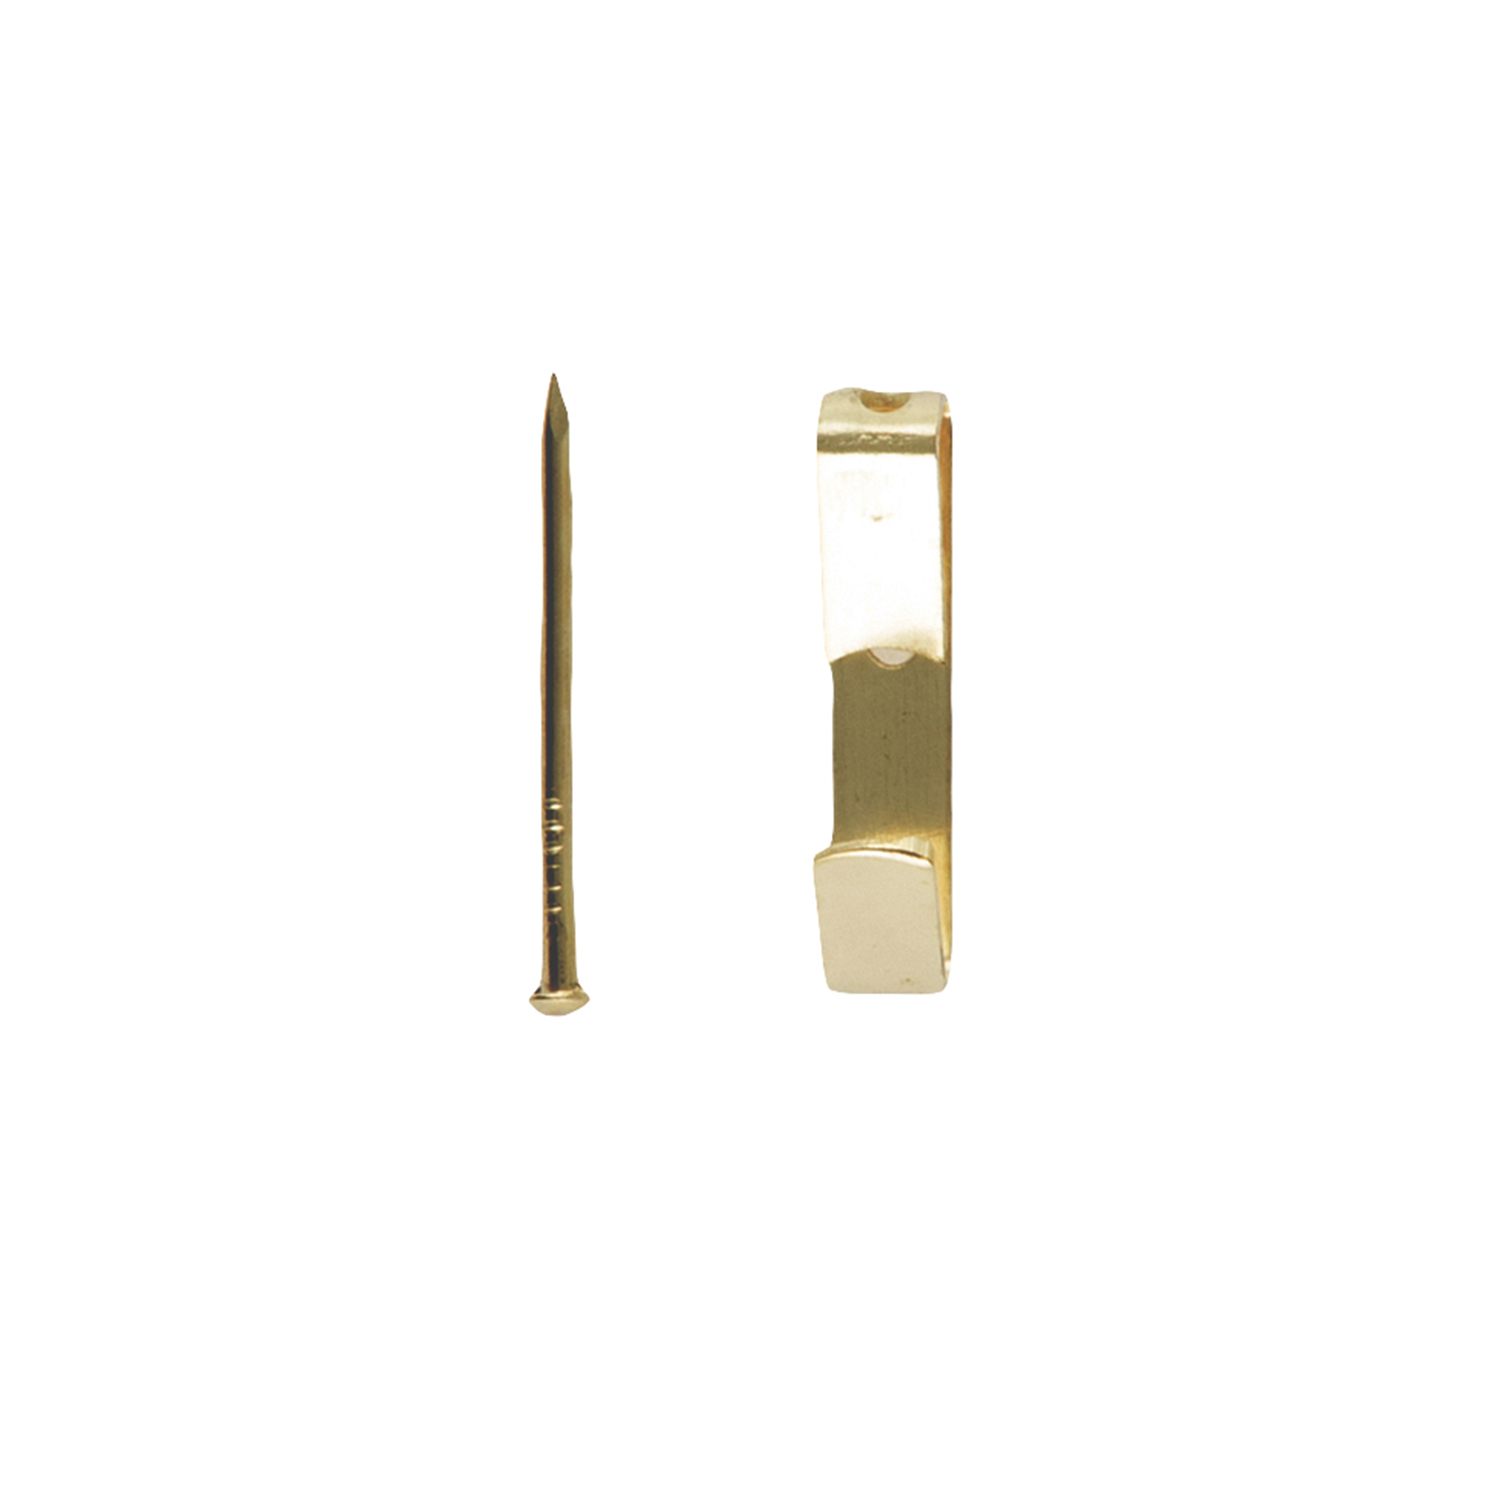 Hiatt Brass Picture Hook and Pin 10 Pack Image 2